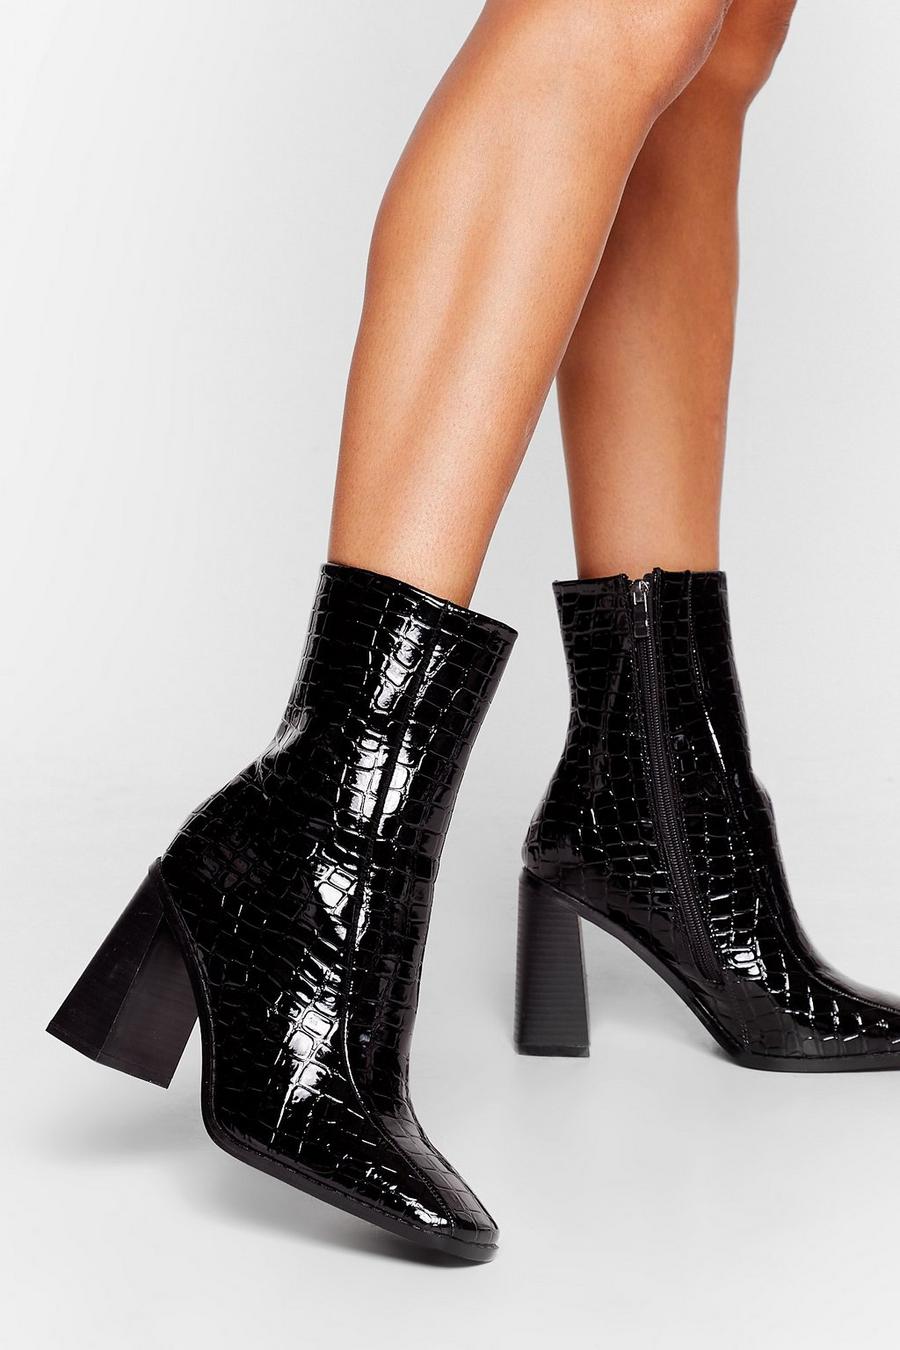 Croc Flare Heeled Ankle Boots